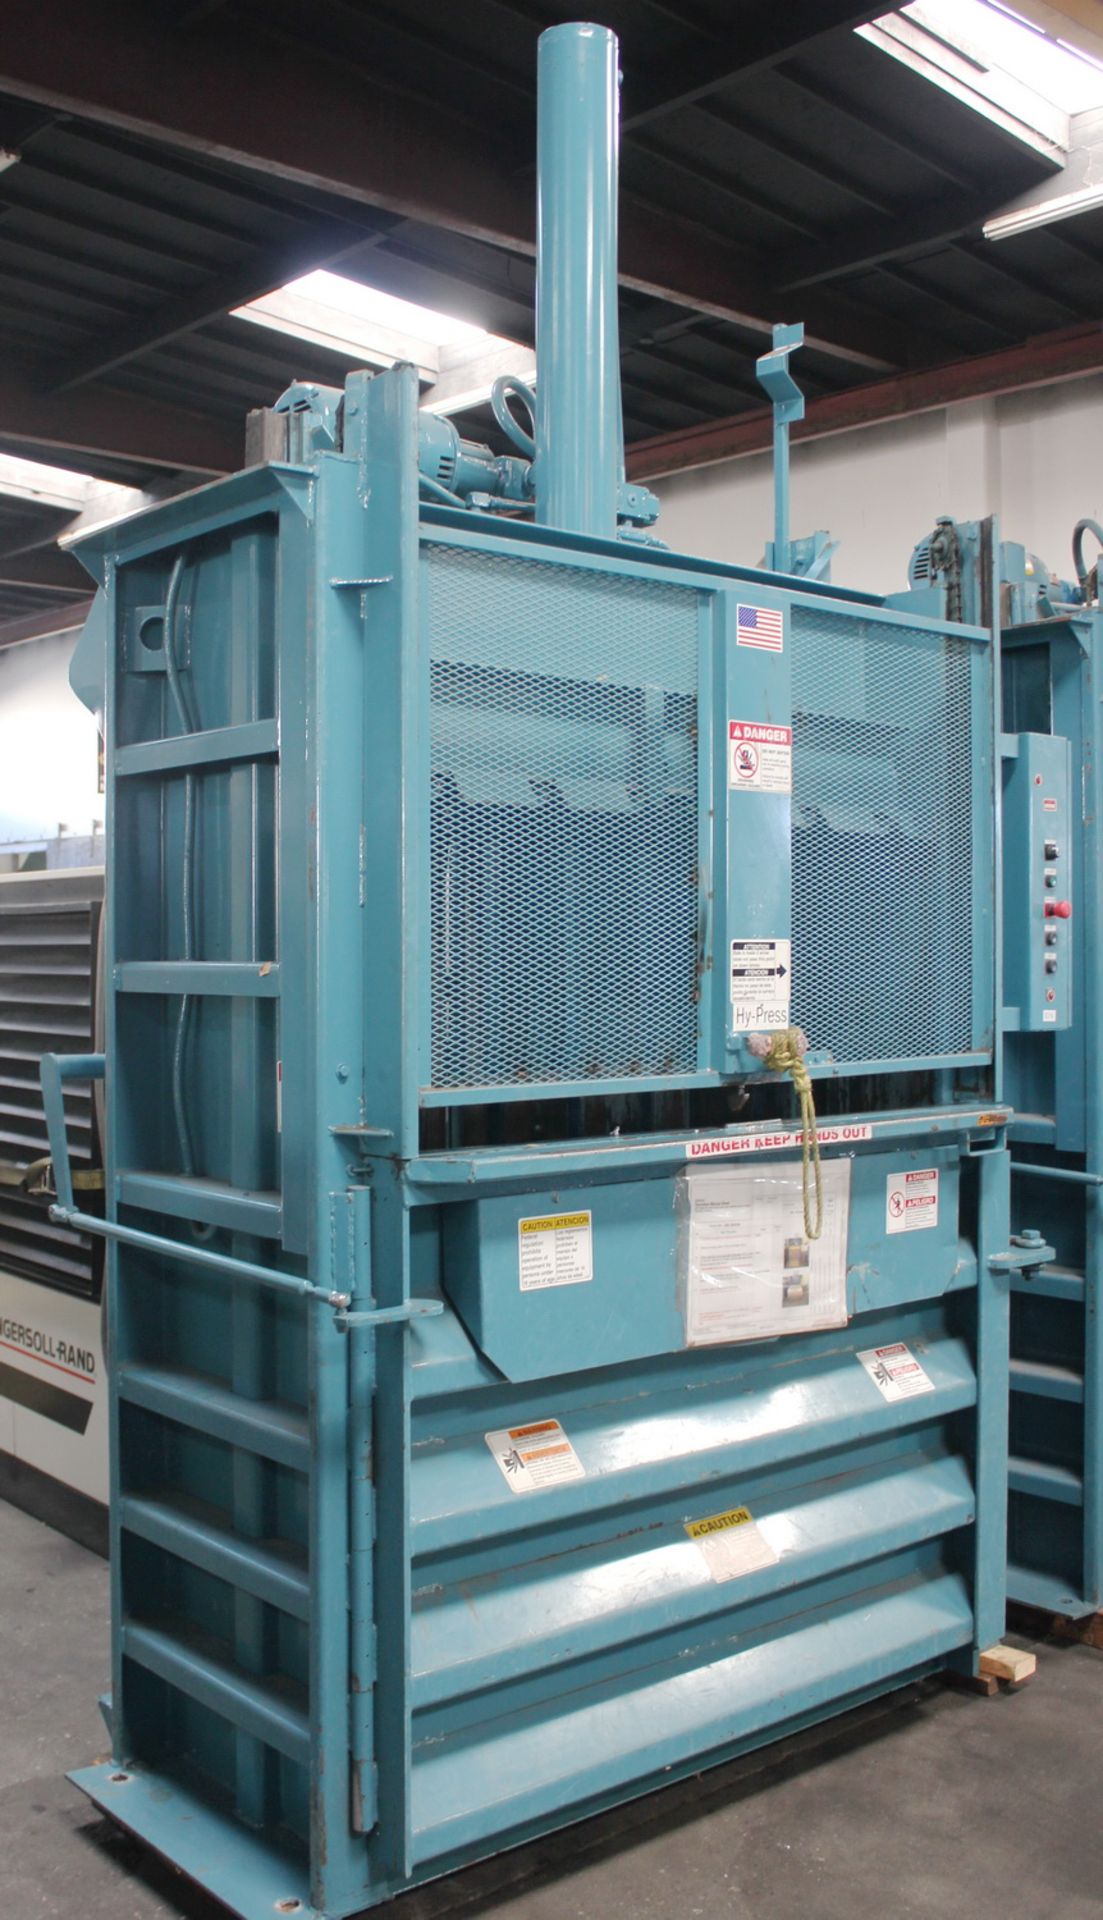 60" x 30" x 48" Marathon Vertical Hyd. Baler Compactor V-6030HD 10 HP - Located In: Huntington Park, - Image 3 of 11